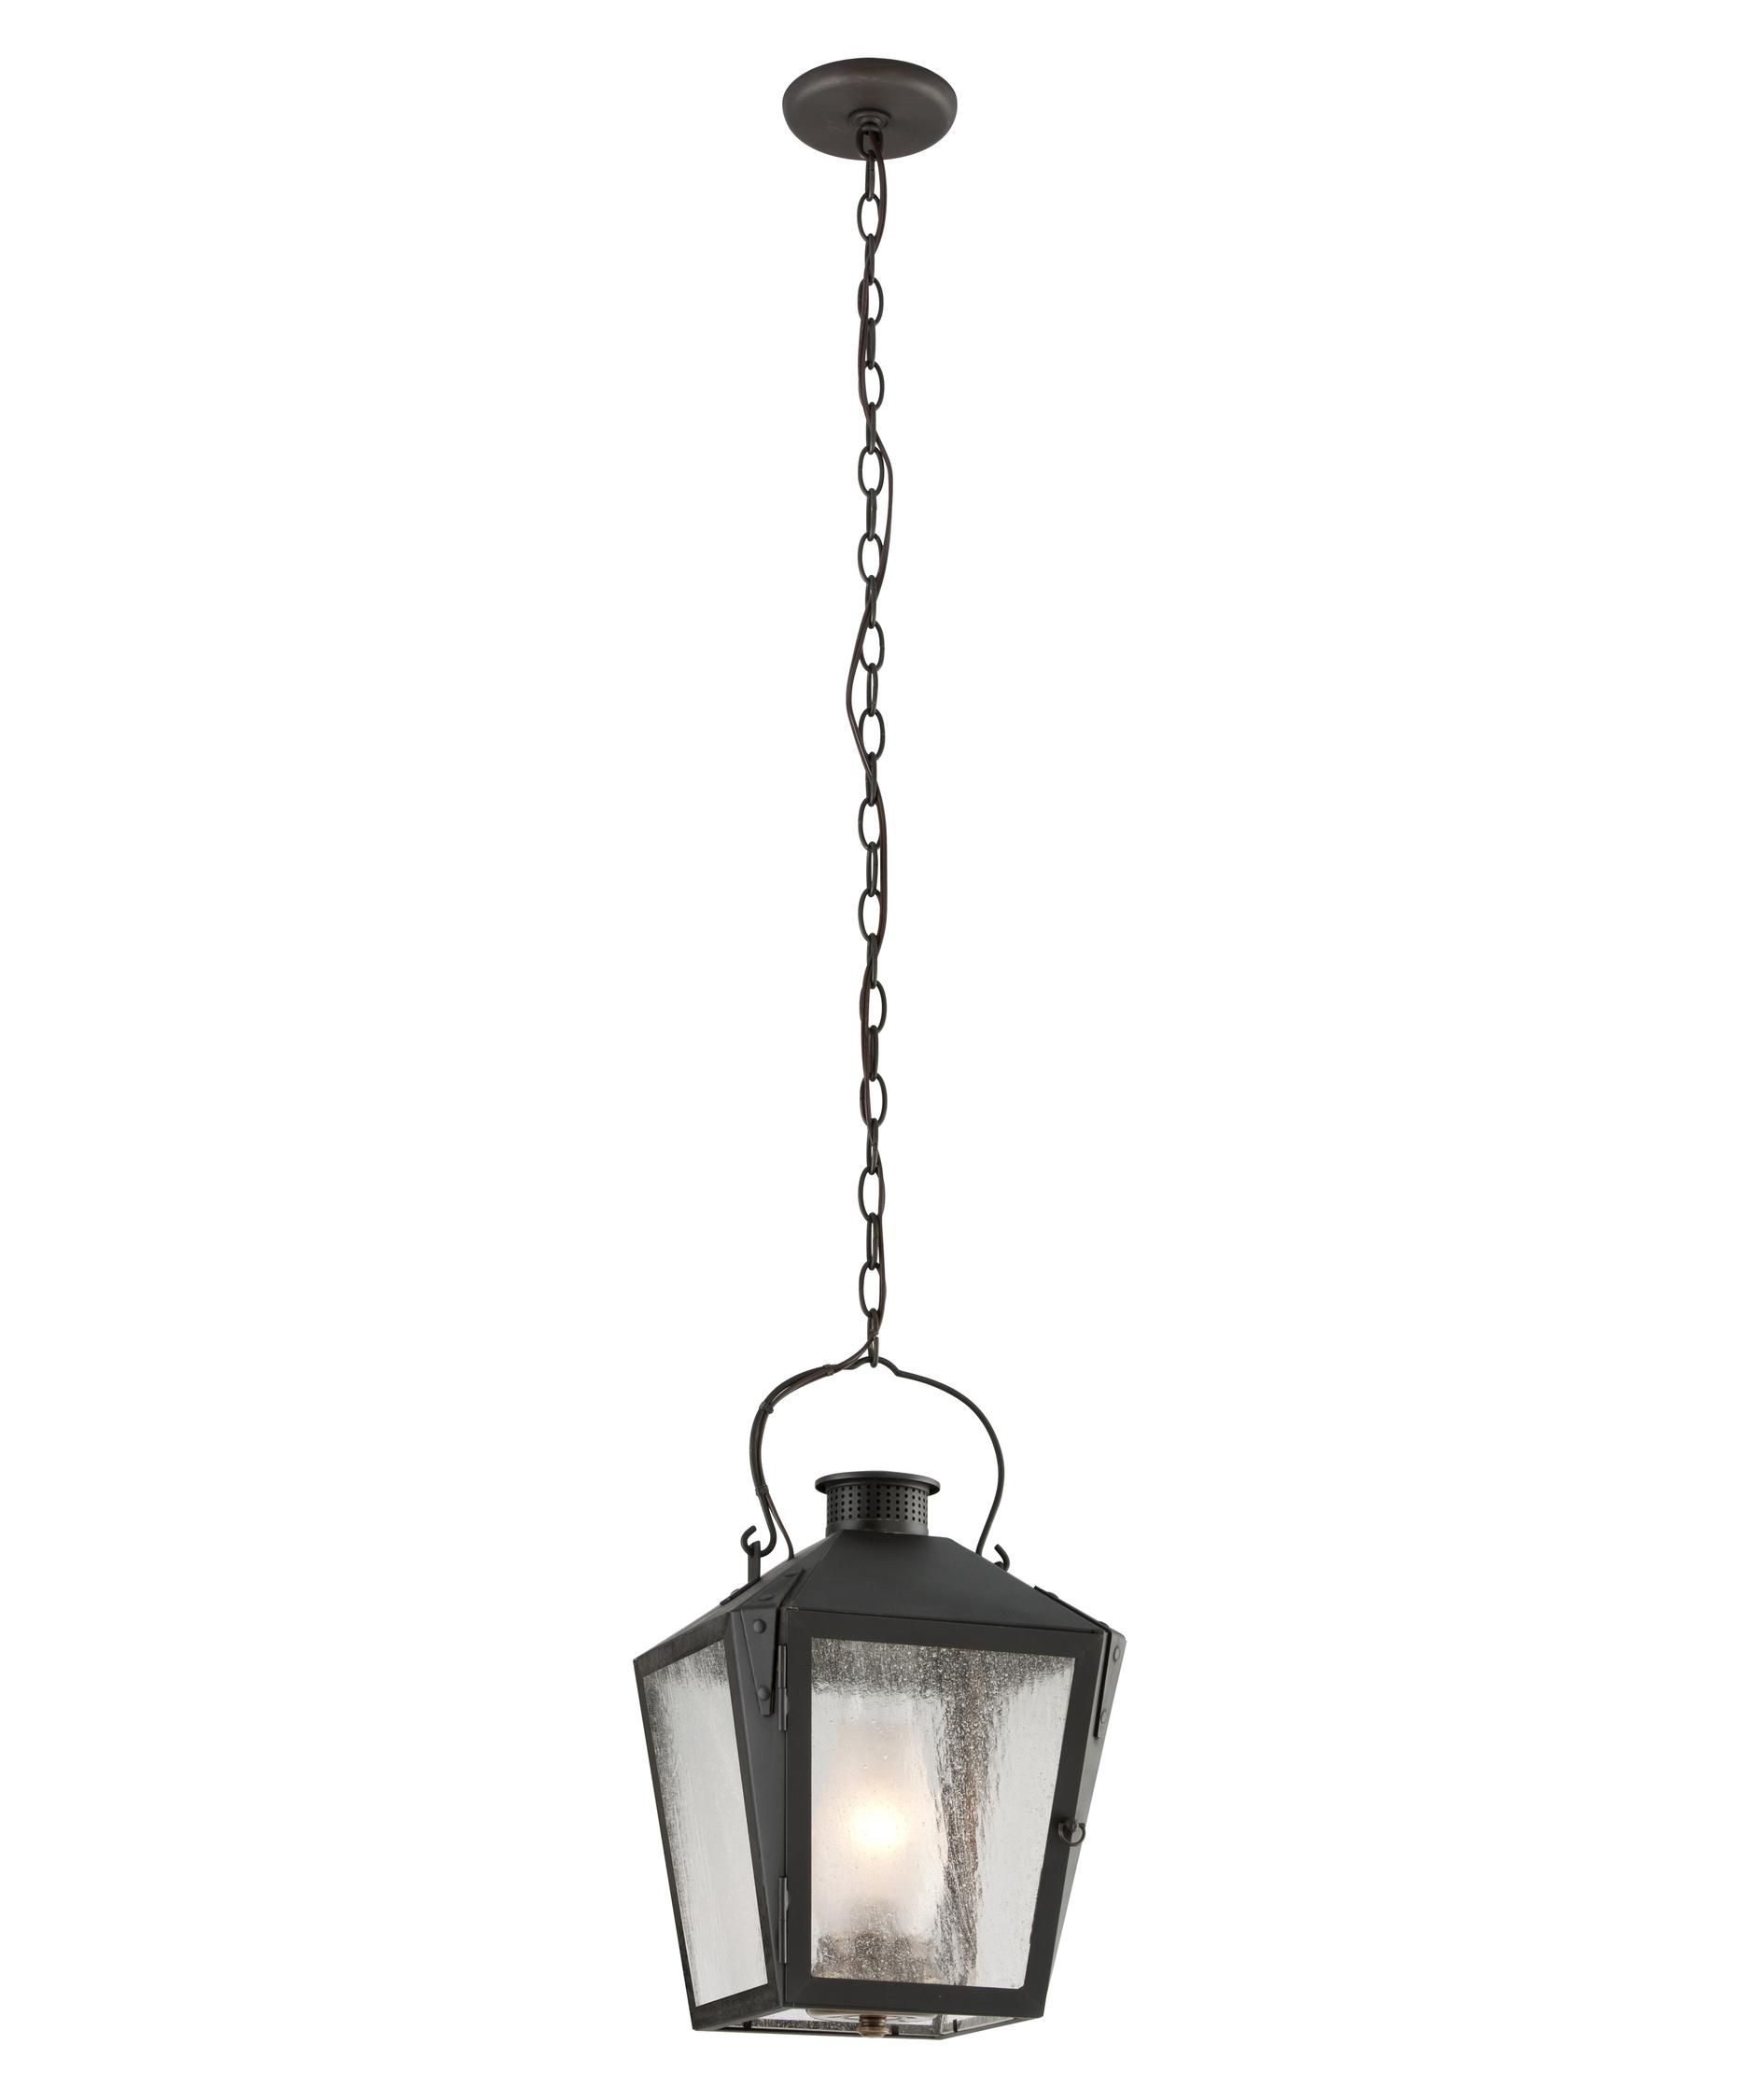 Troy Lighting F3766 Nantucket 11 Inch Wide 1 Light Outdoor Hanging With Regard To Nantucket Outdoor Lanterns (View 14 of 20)